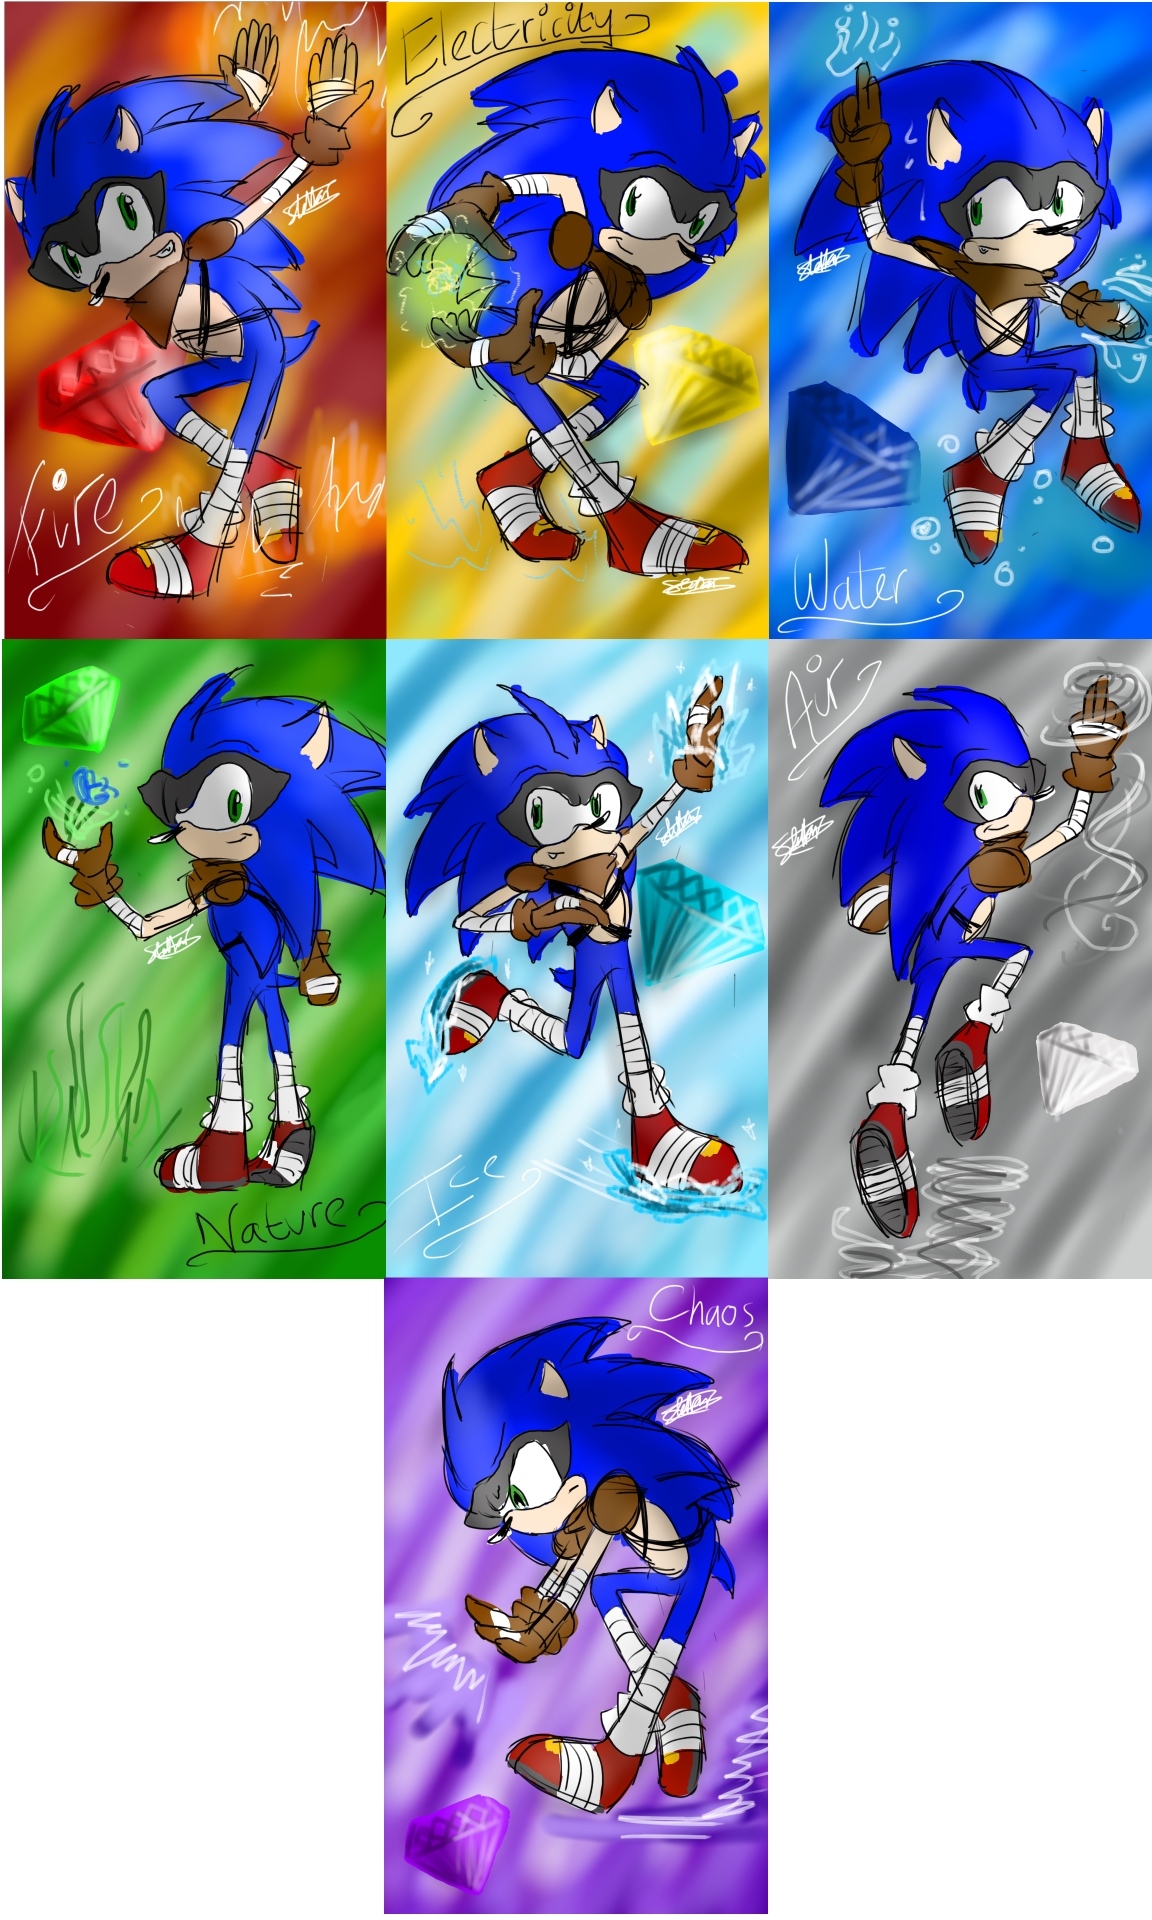 how powerful are the chaos emeralds by themselves? : r/PowerScaling